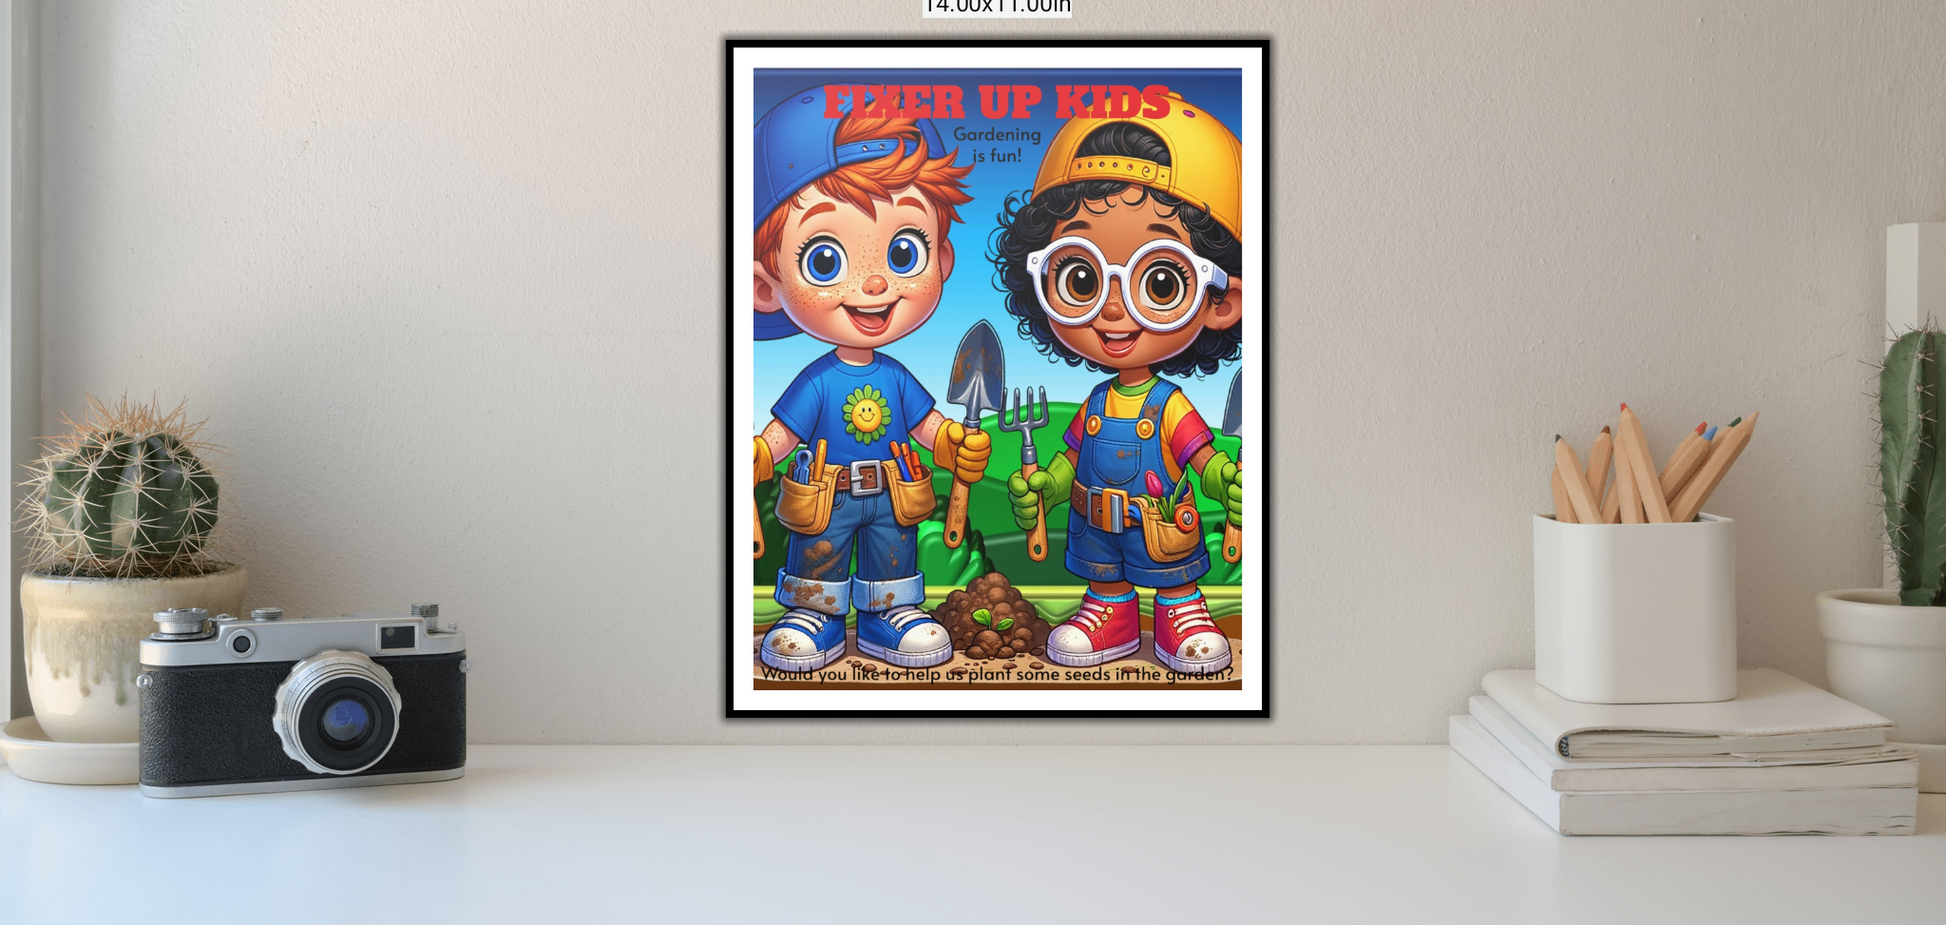 Fixer up kids: Betty and Tommy garden adventure prints - Chris Thompkins